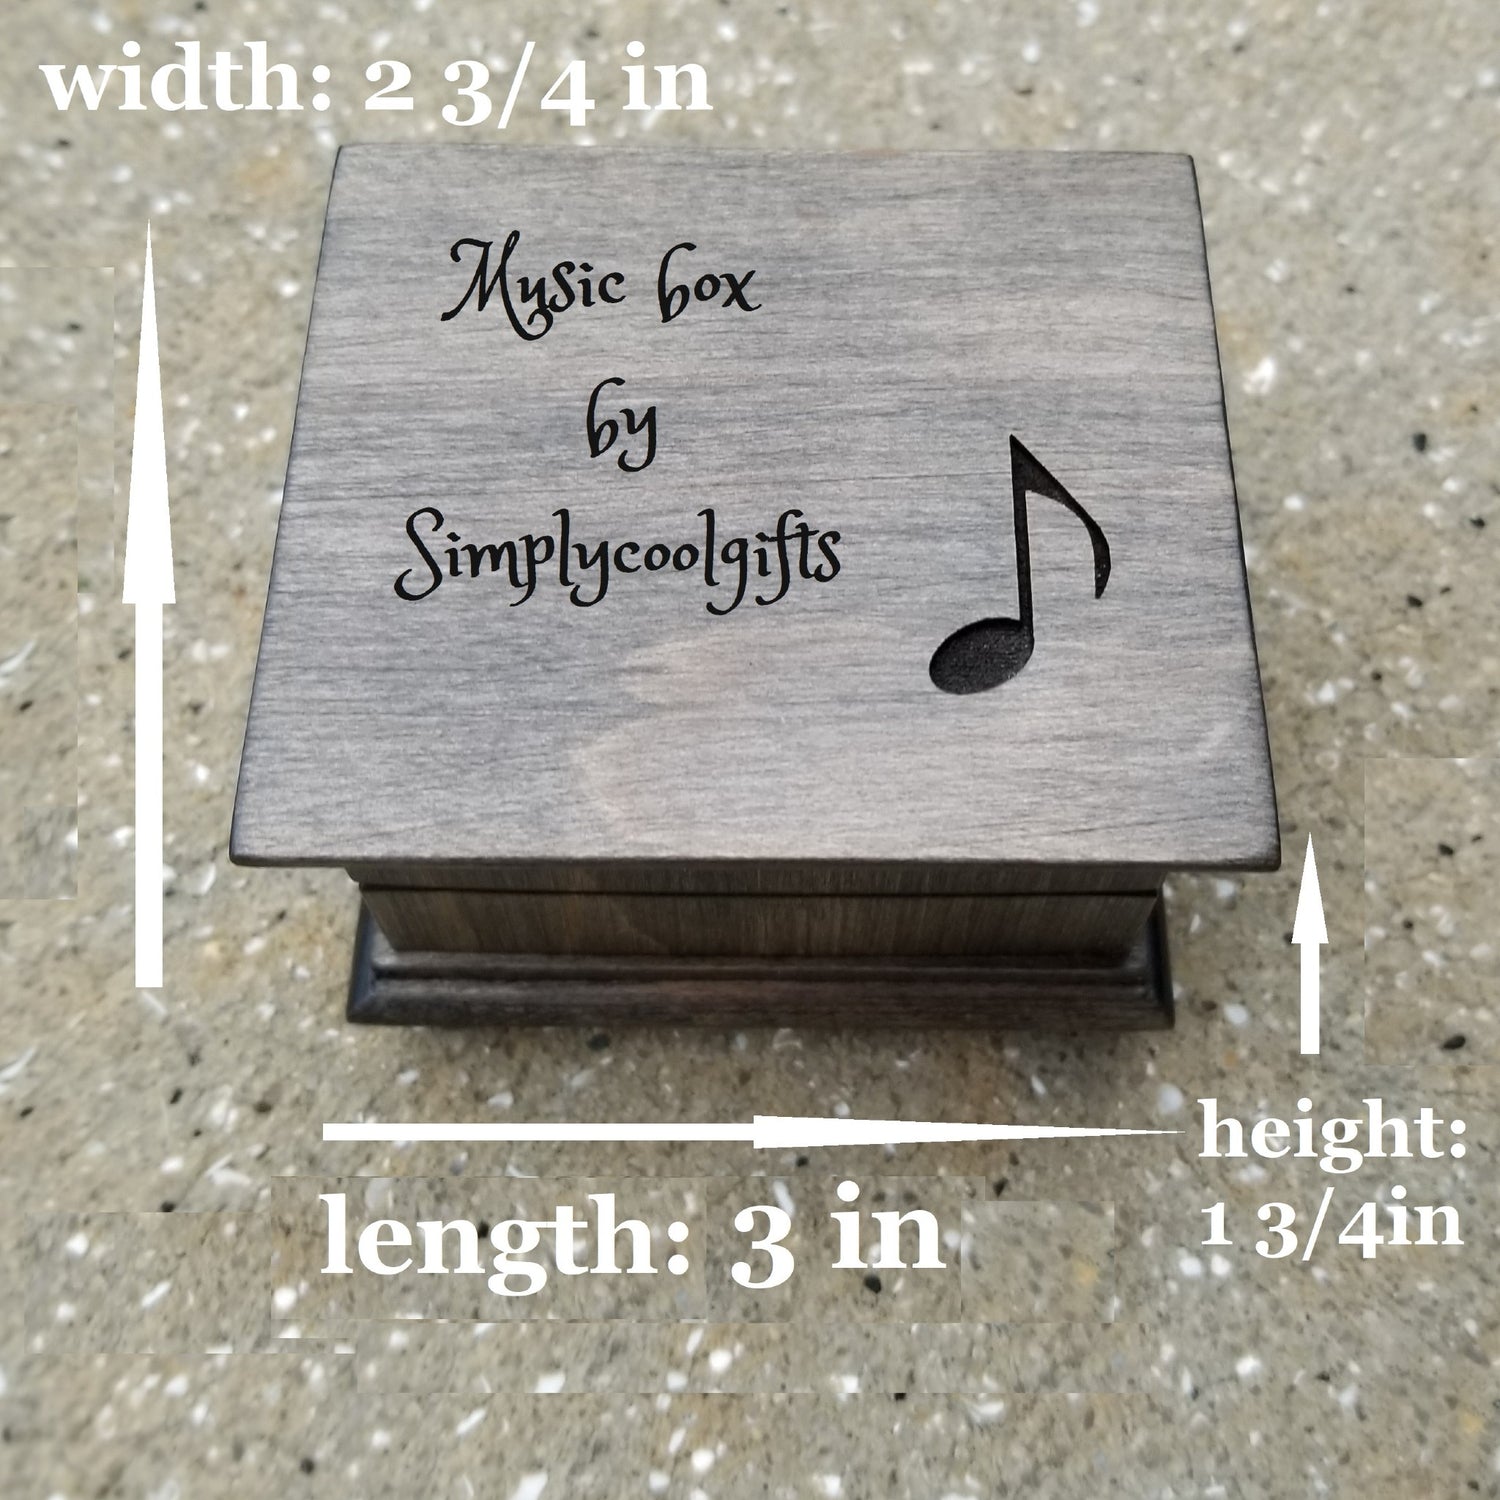 Music box by Simplycoolgifts